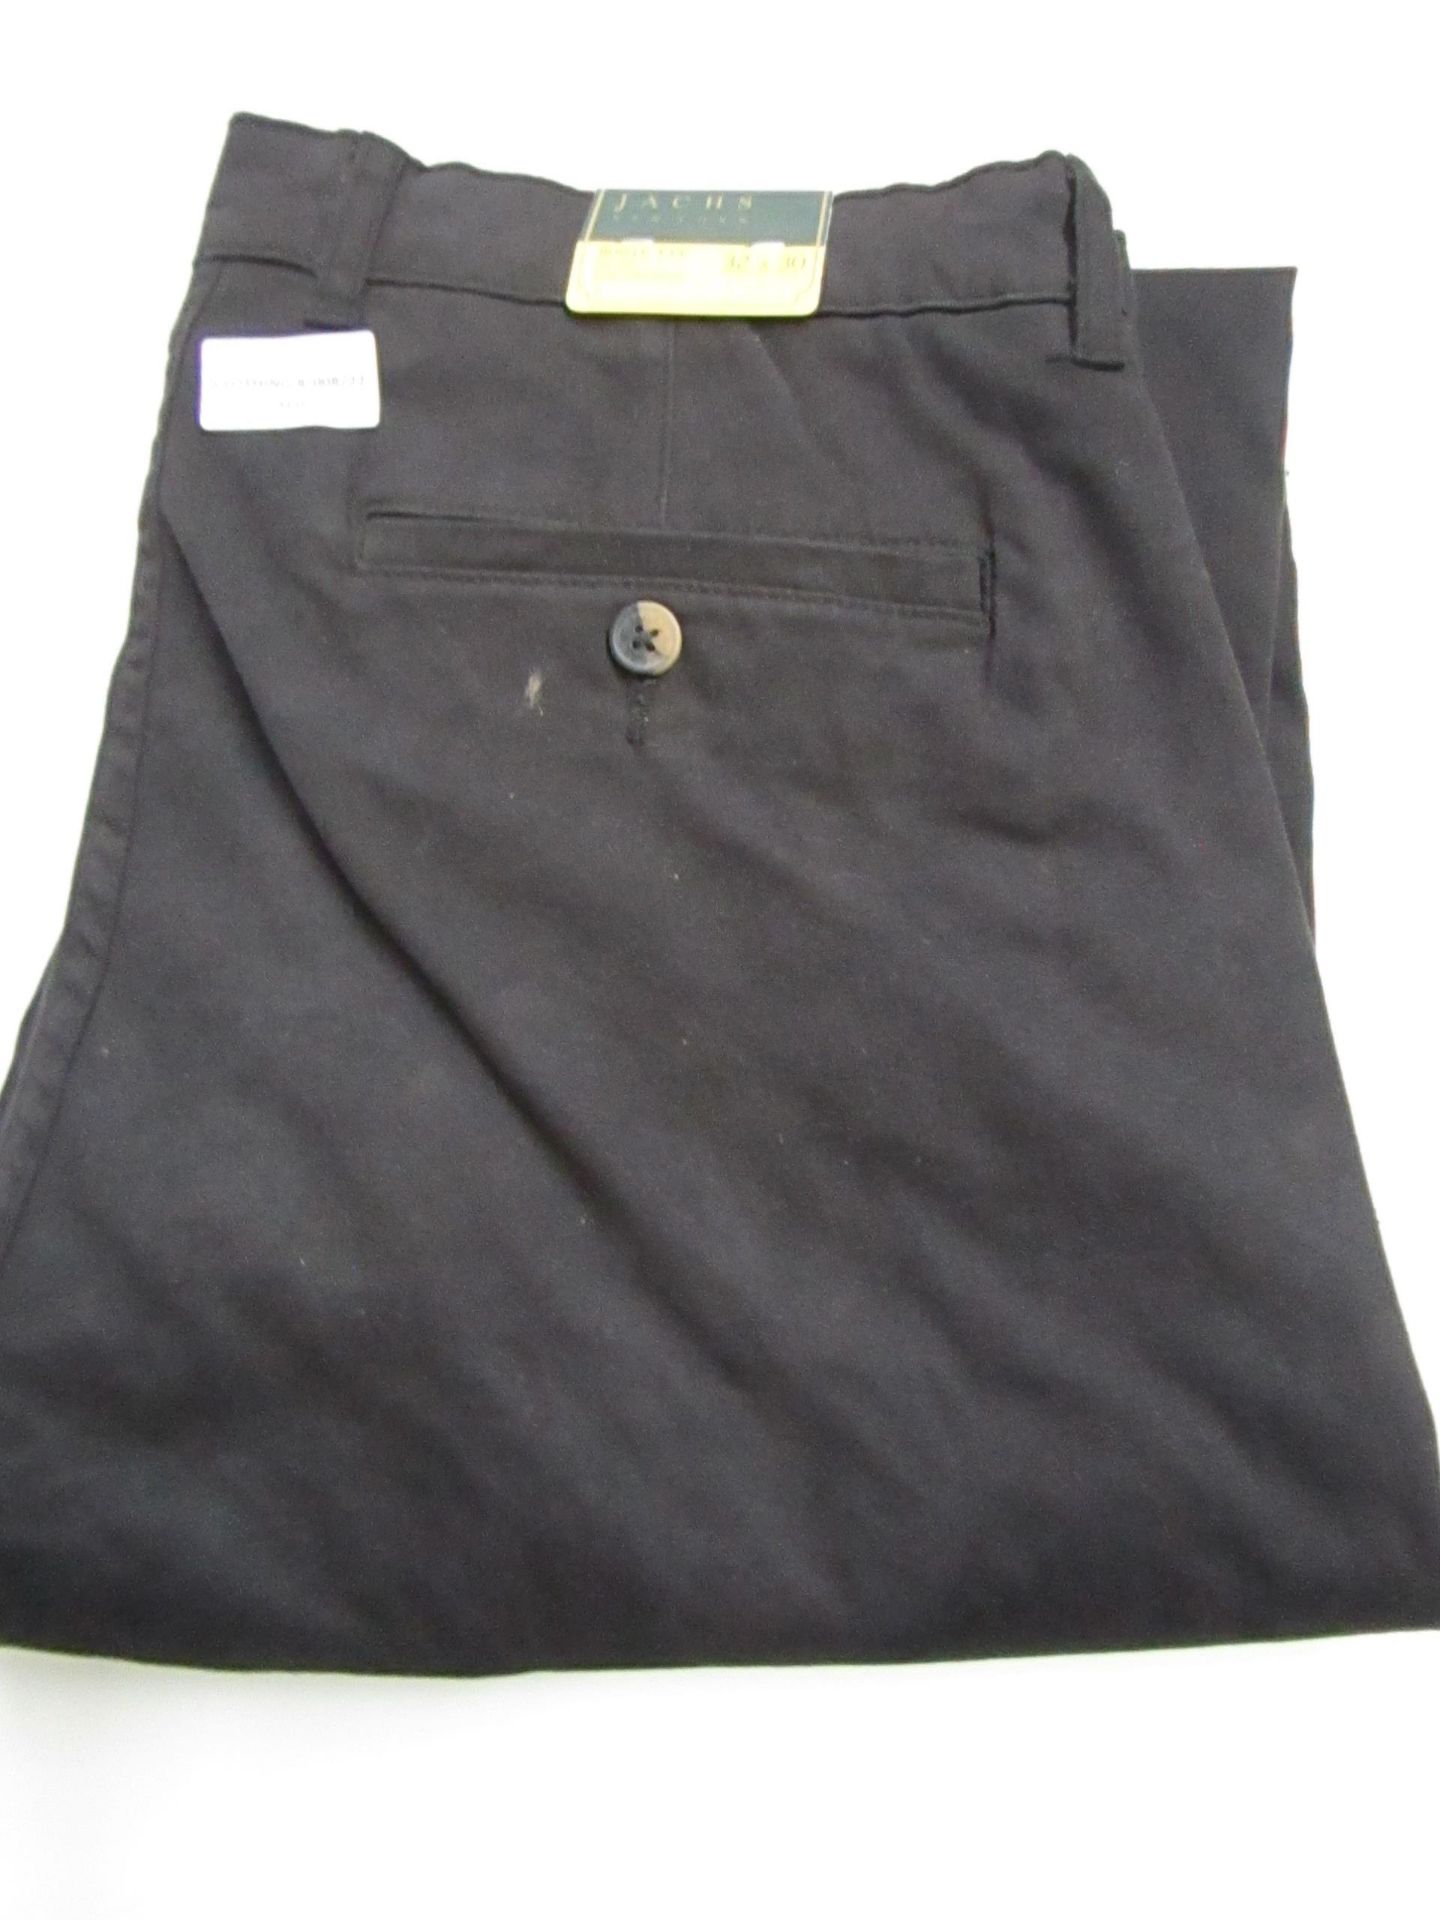 Jachs Bowie Fit Mid-Rise Slim Straight Leg Chinos Black Size W32 L30 New With Tags